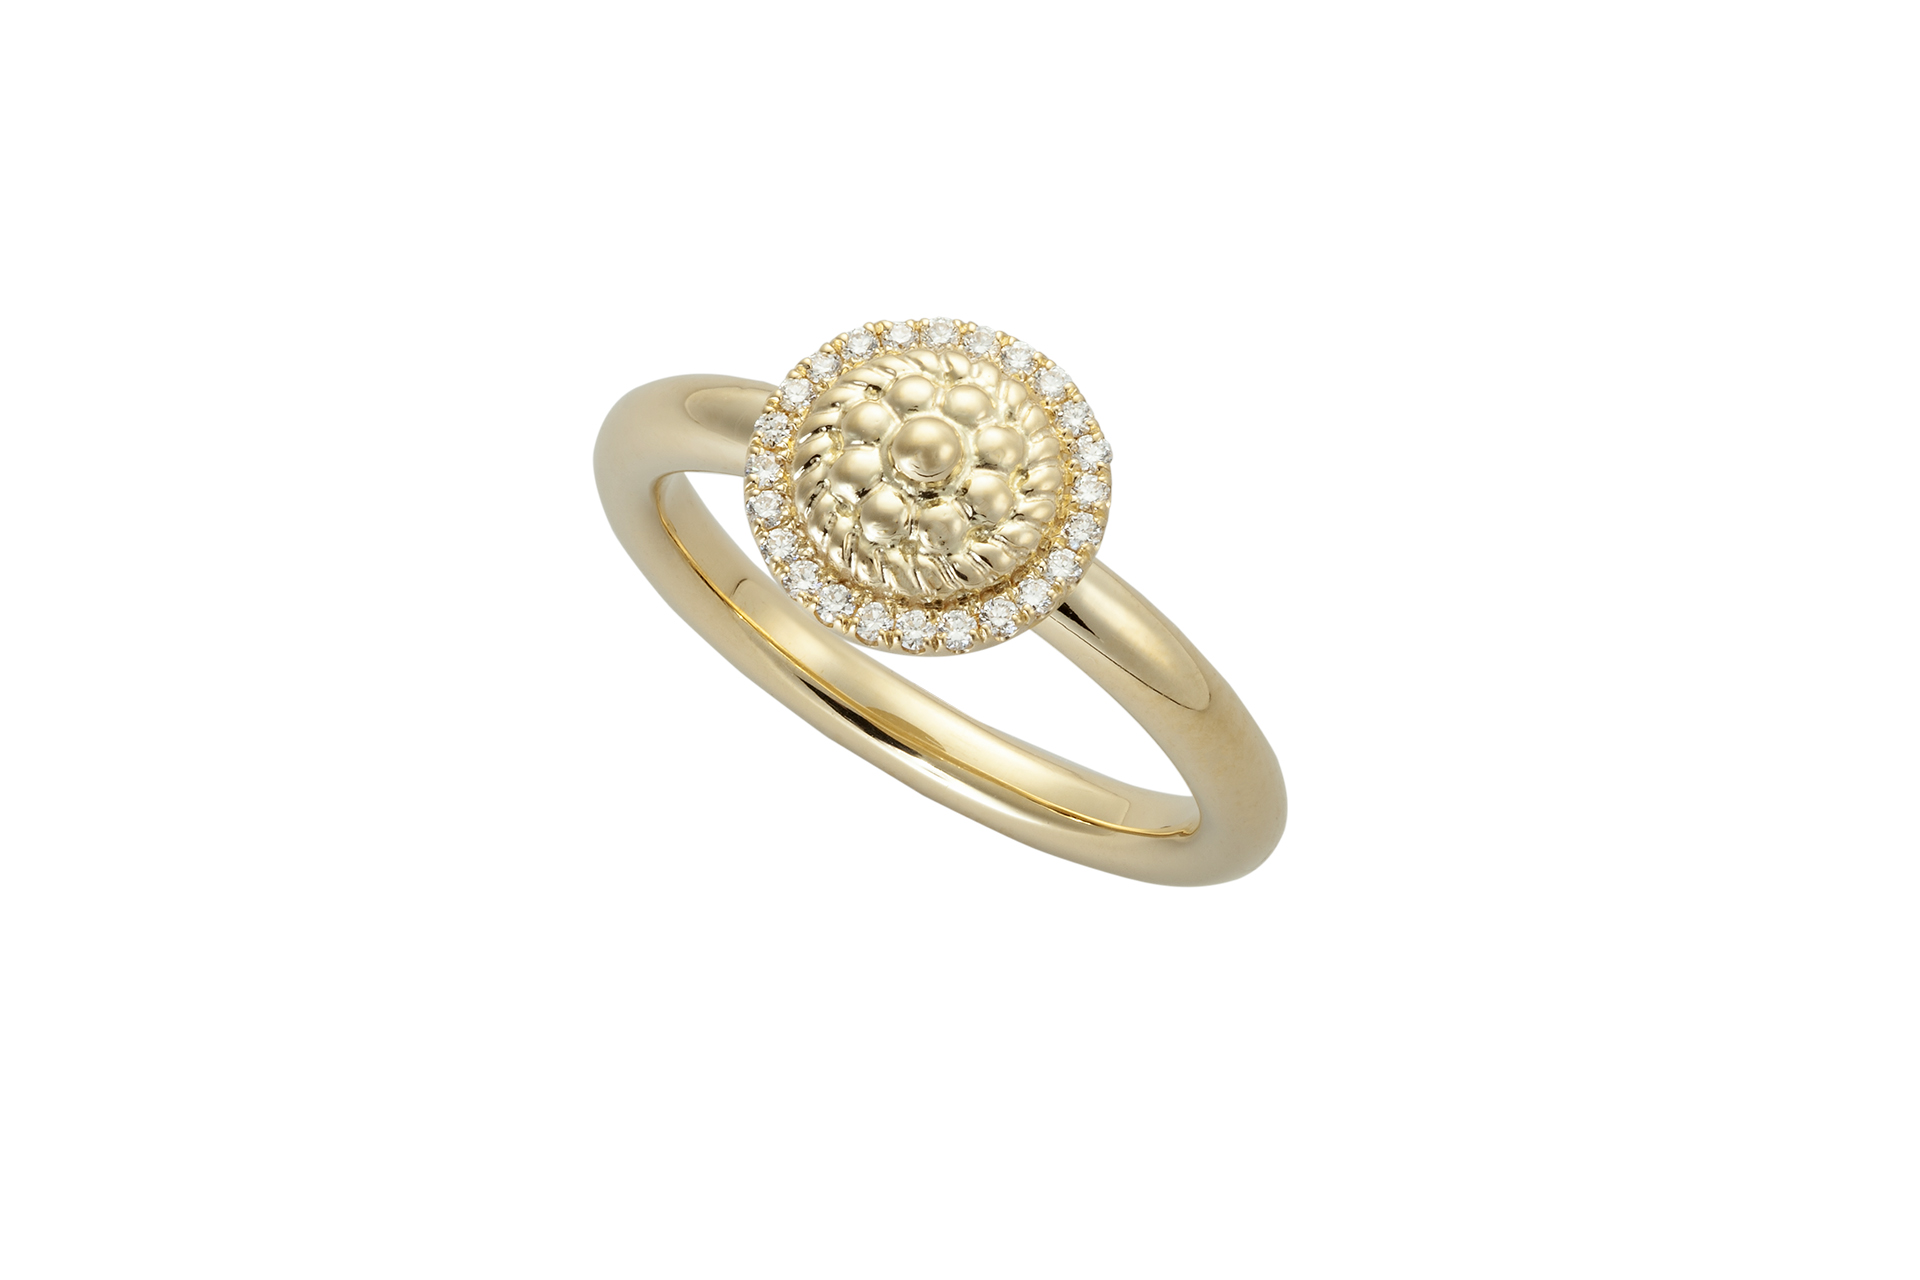 Floral Twist Ring with Diamonds by Christina Malle